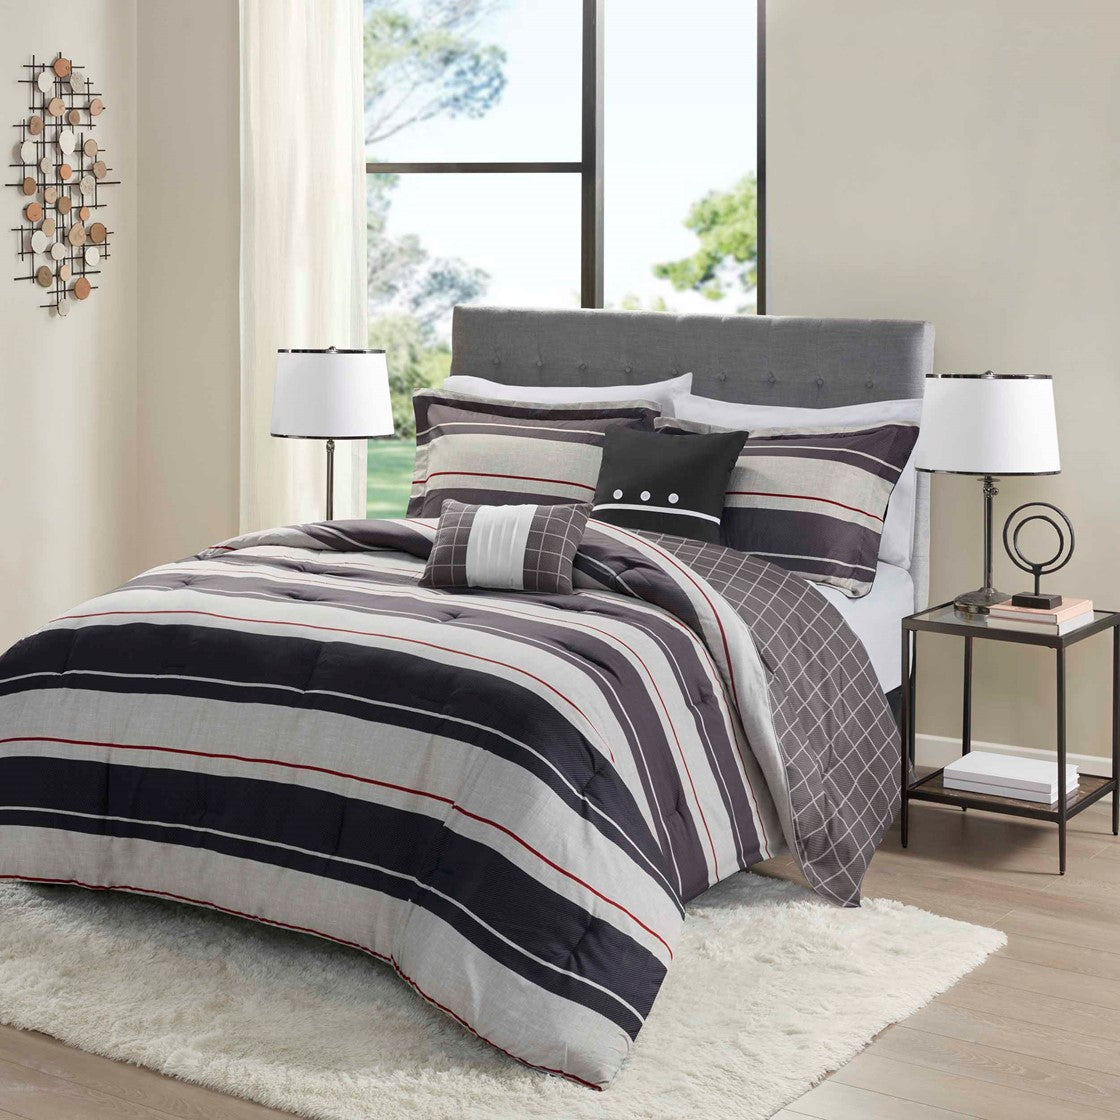 Madison Park Essentials Dalton Comforter set with two decorative pillows - Gray / Charcoal - Queen Size